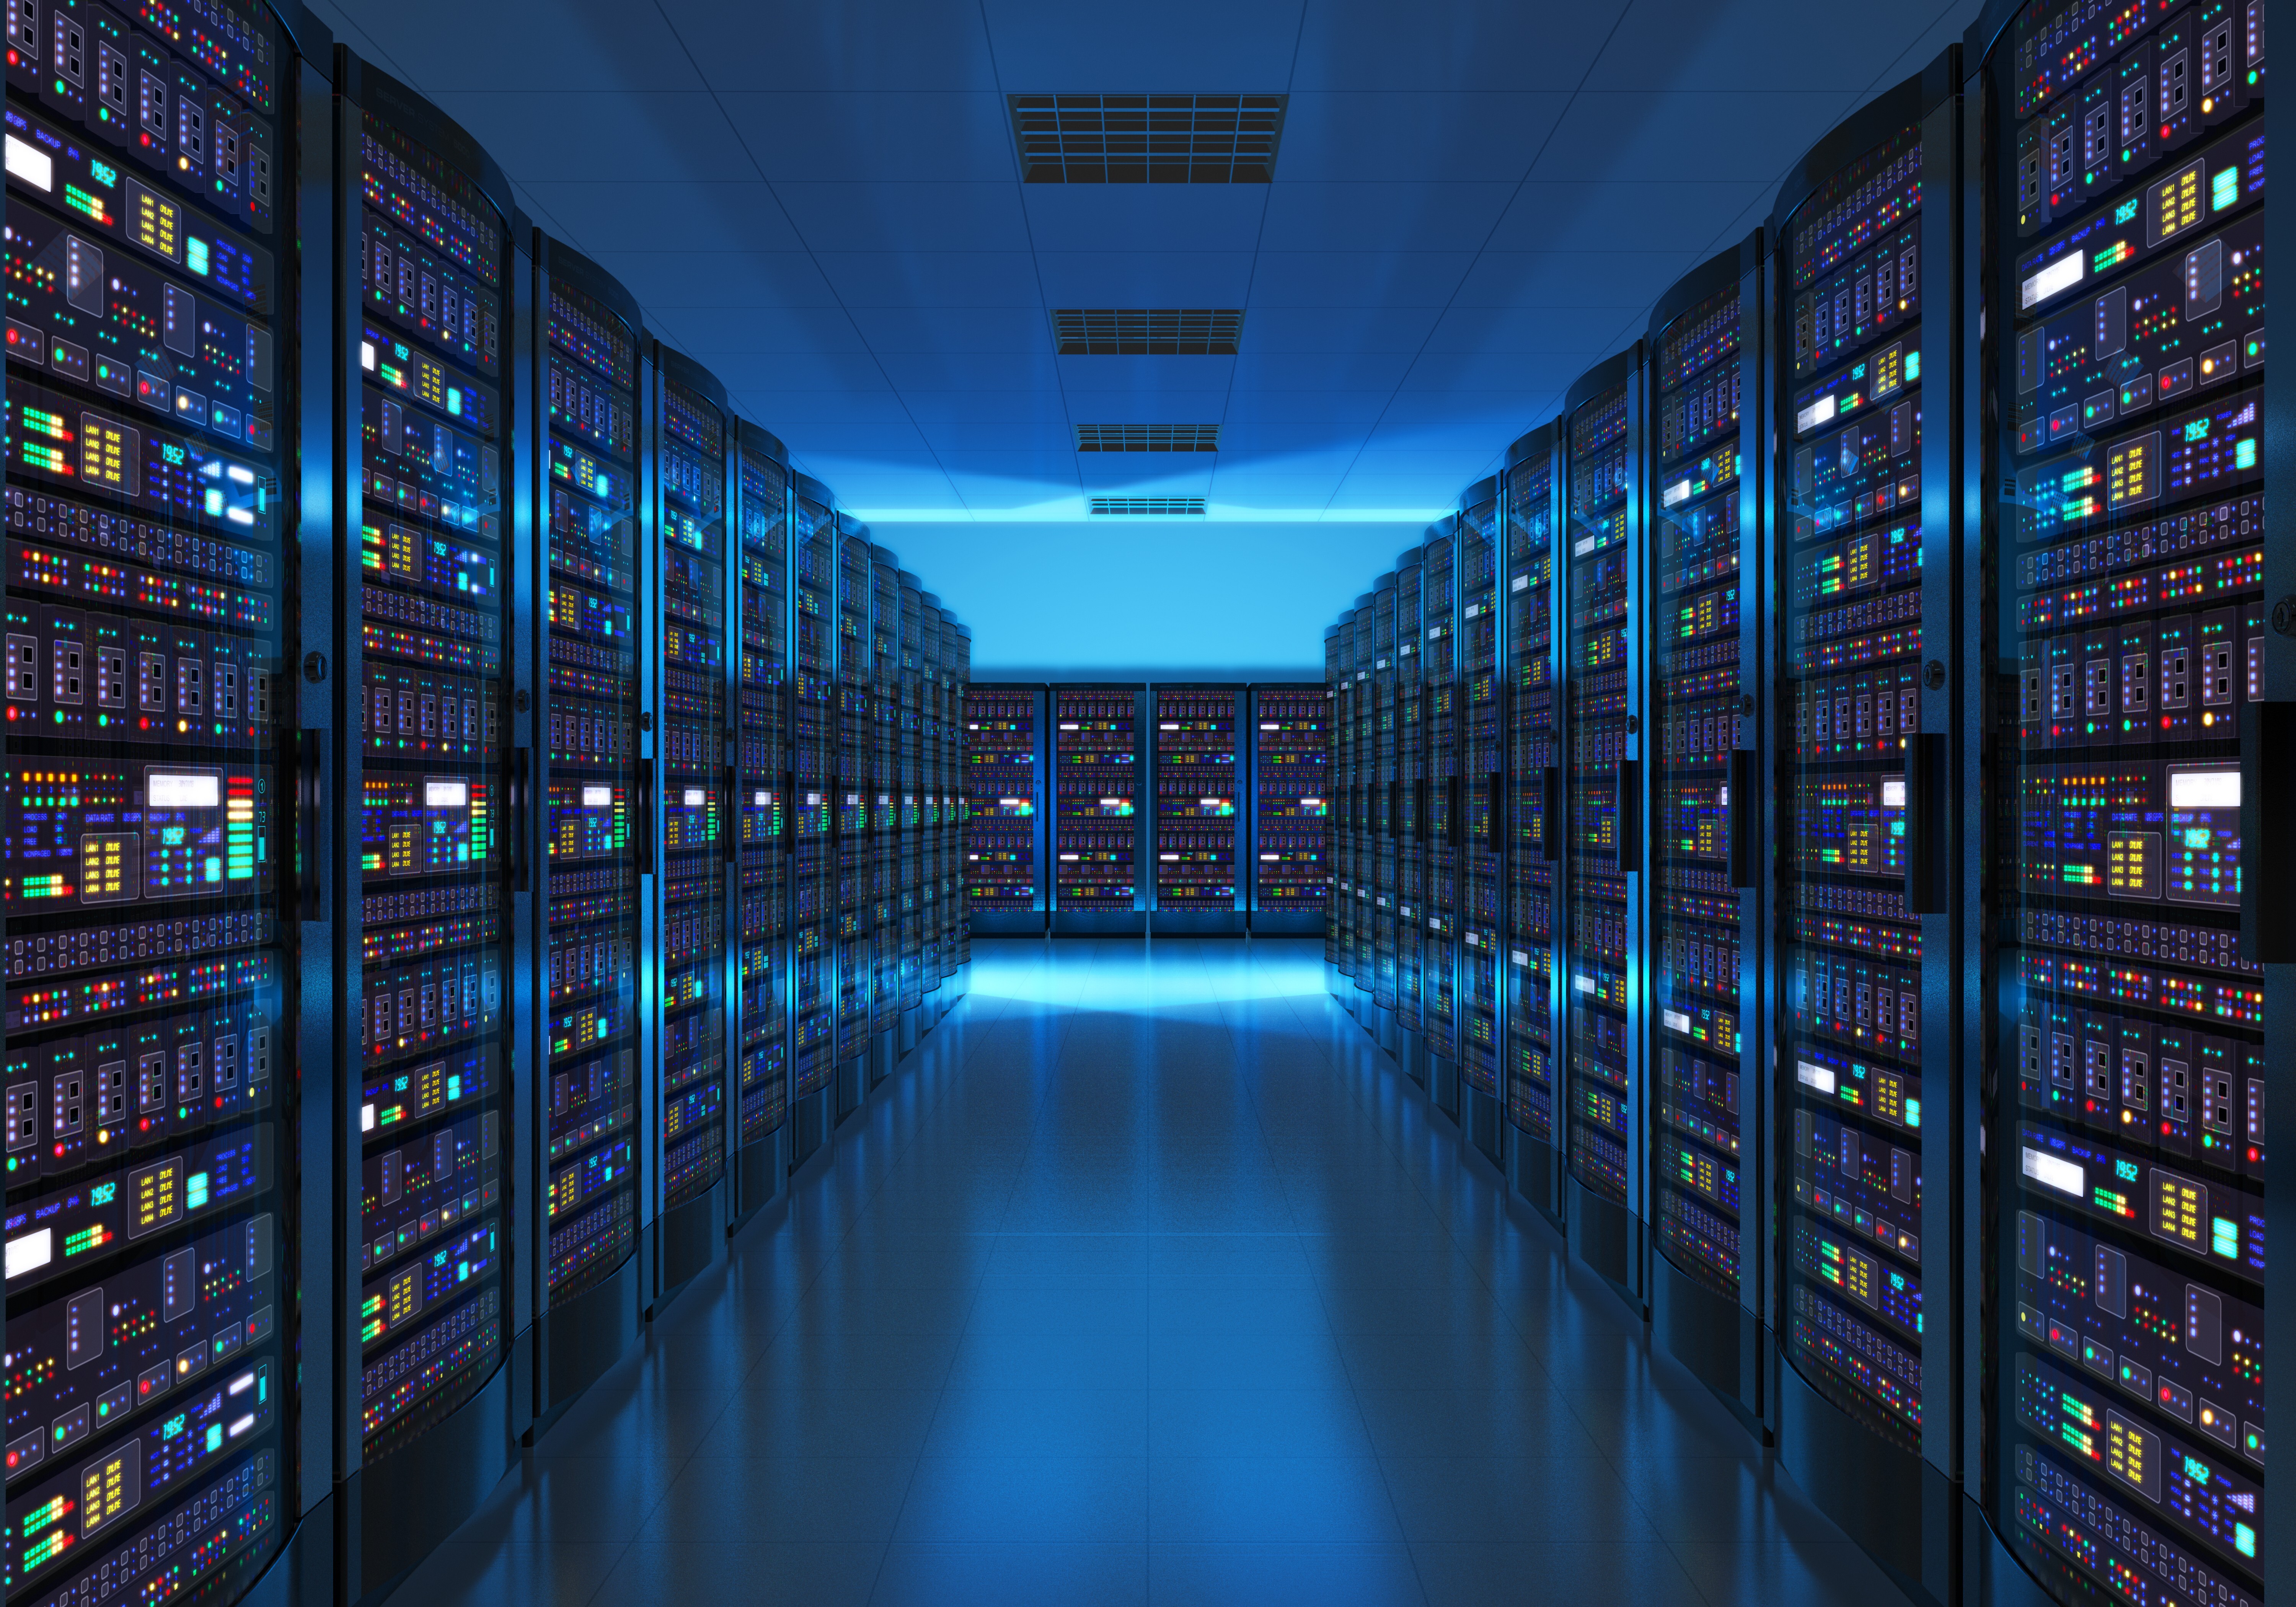 Data centres were a highly sought-after asset class during the start of the Covid-19 pandemic, as the unexpected surge in e-commerce and work-from-home regime sent operators scrambling for space. Photo: Shutterstock Images